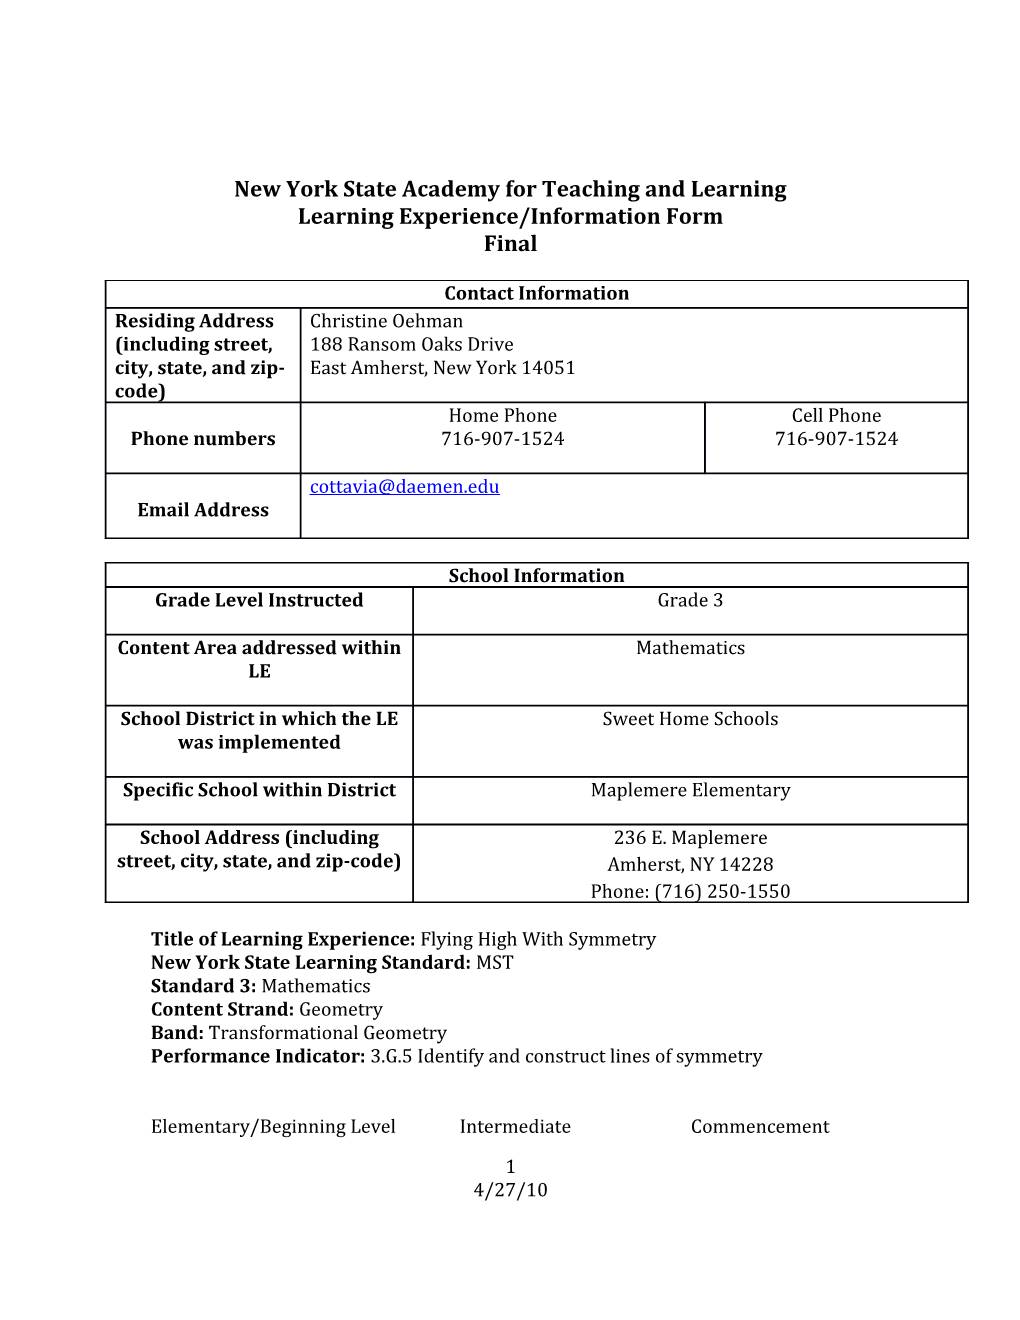 Learning Experience/Information Form